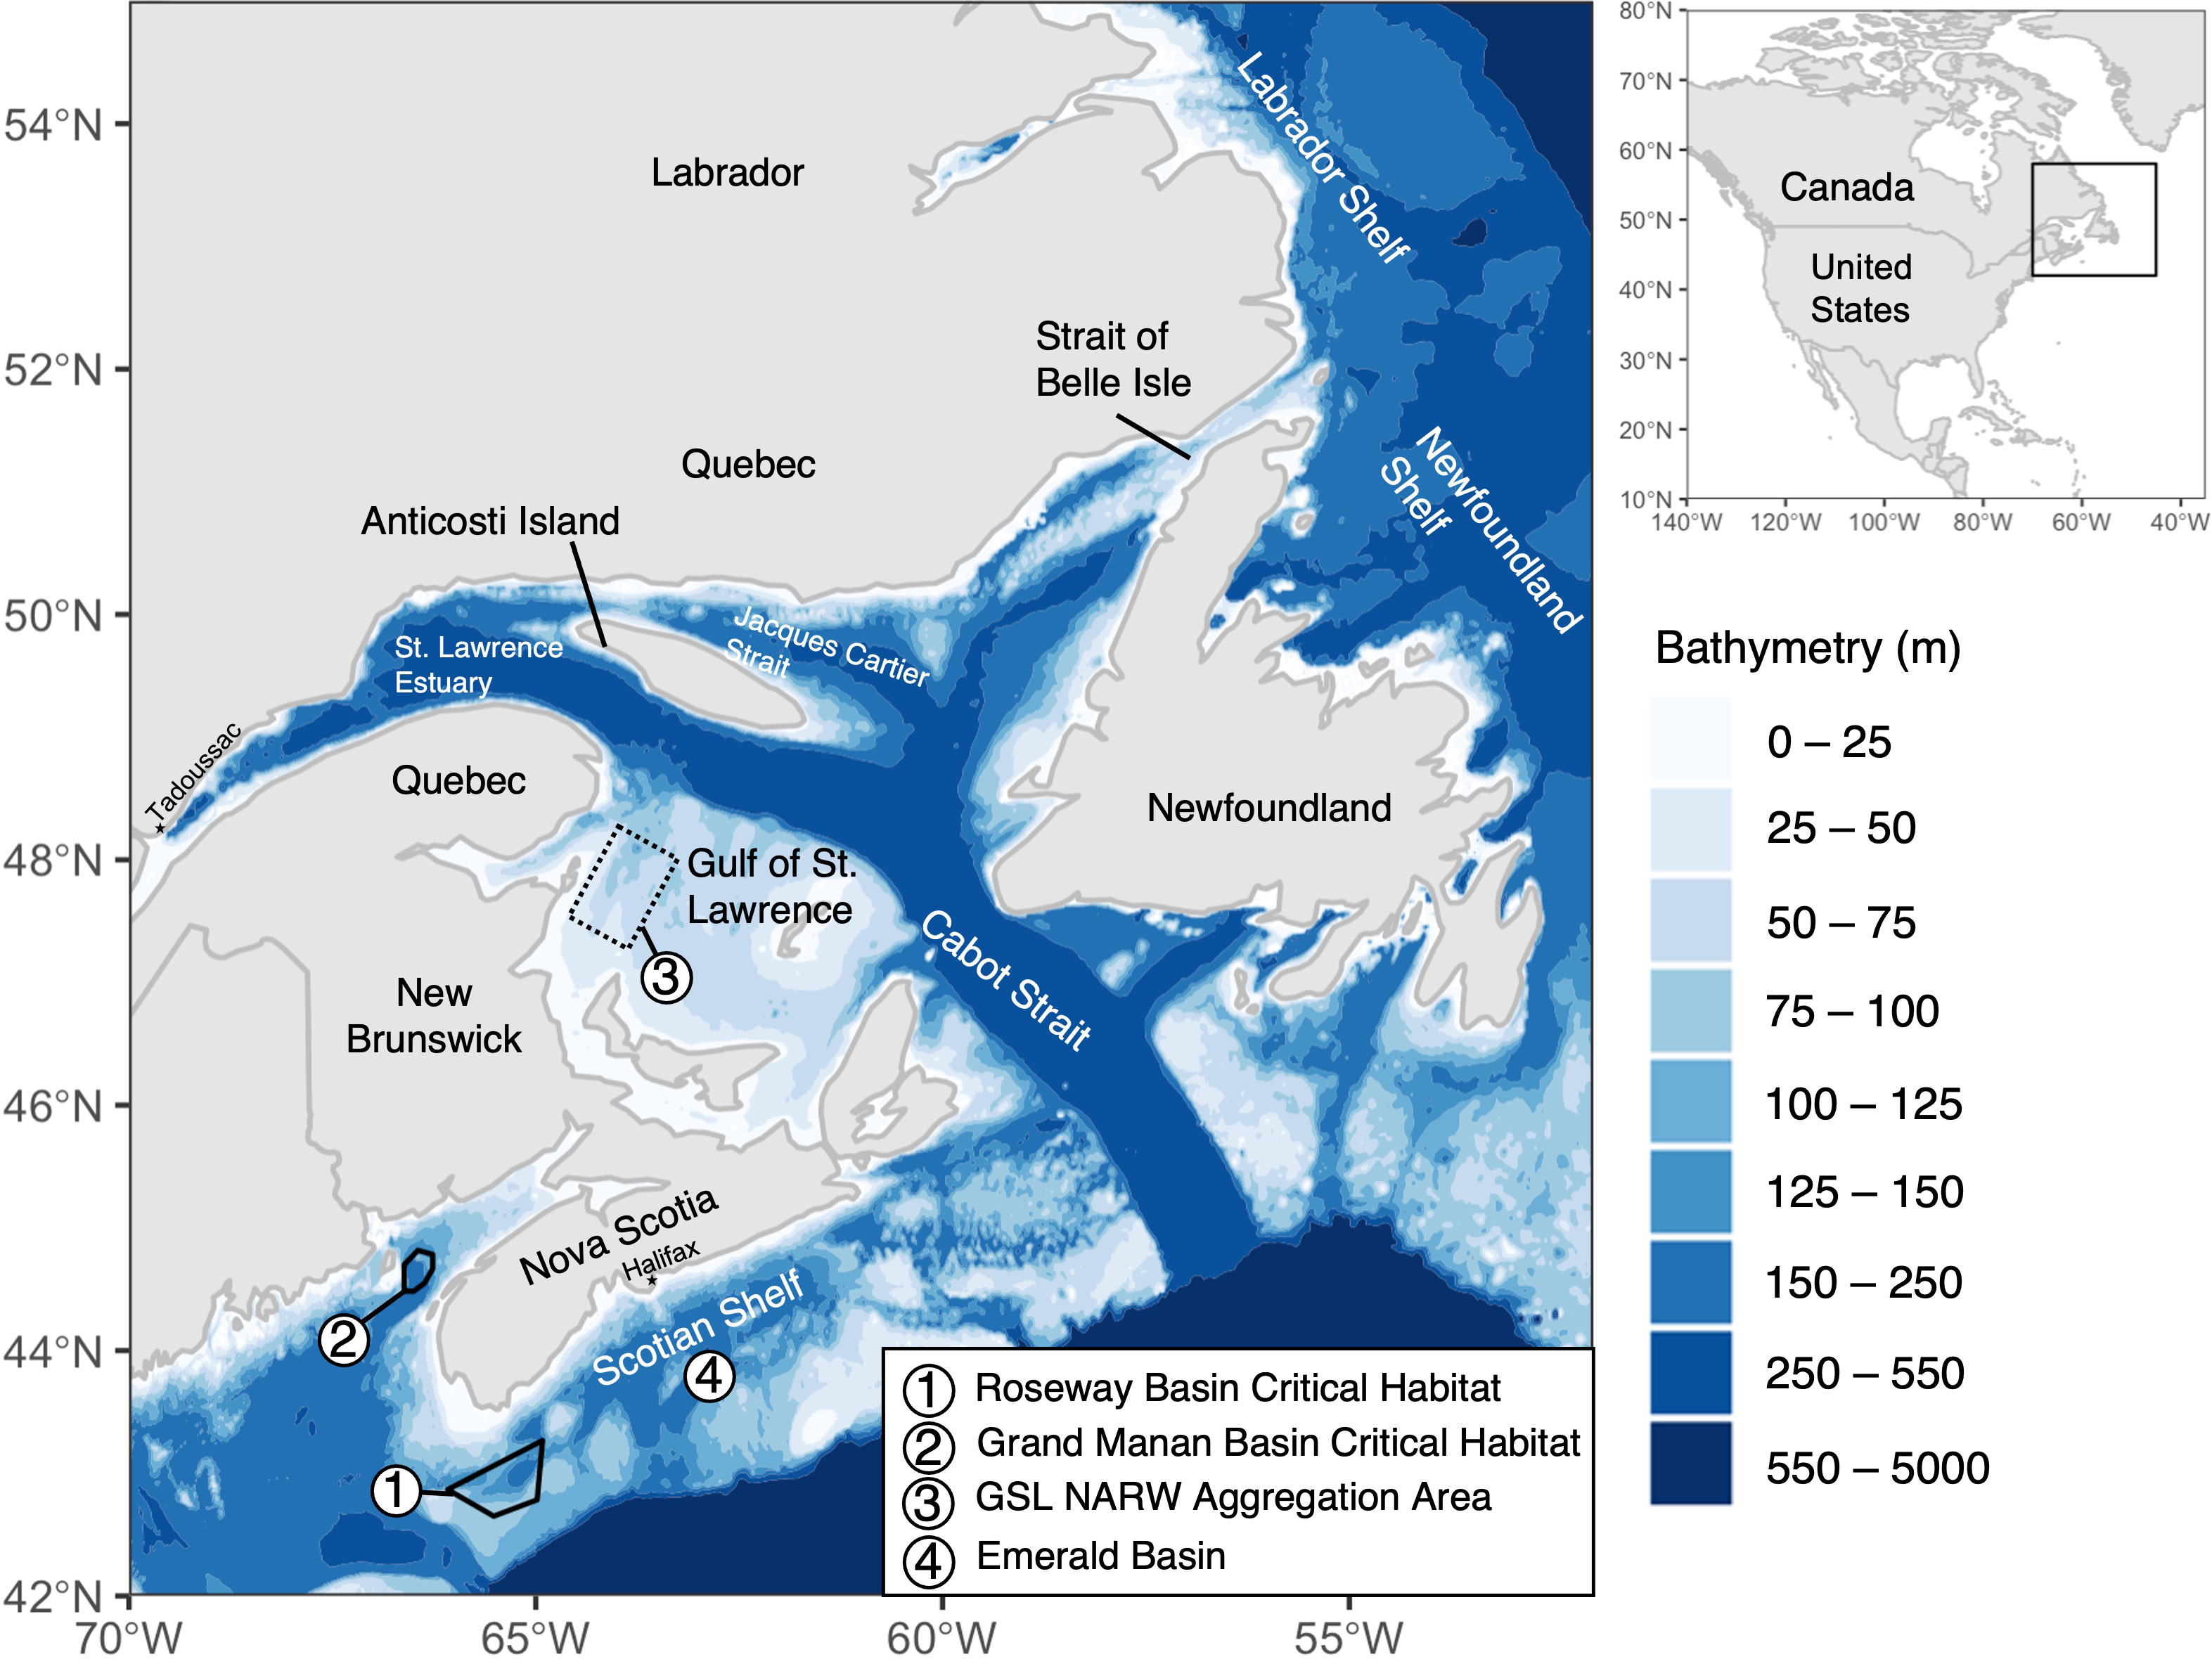 Canada's Oceans Now: Pacific Ecosystems, 2021 - Flow patterns off